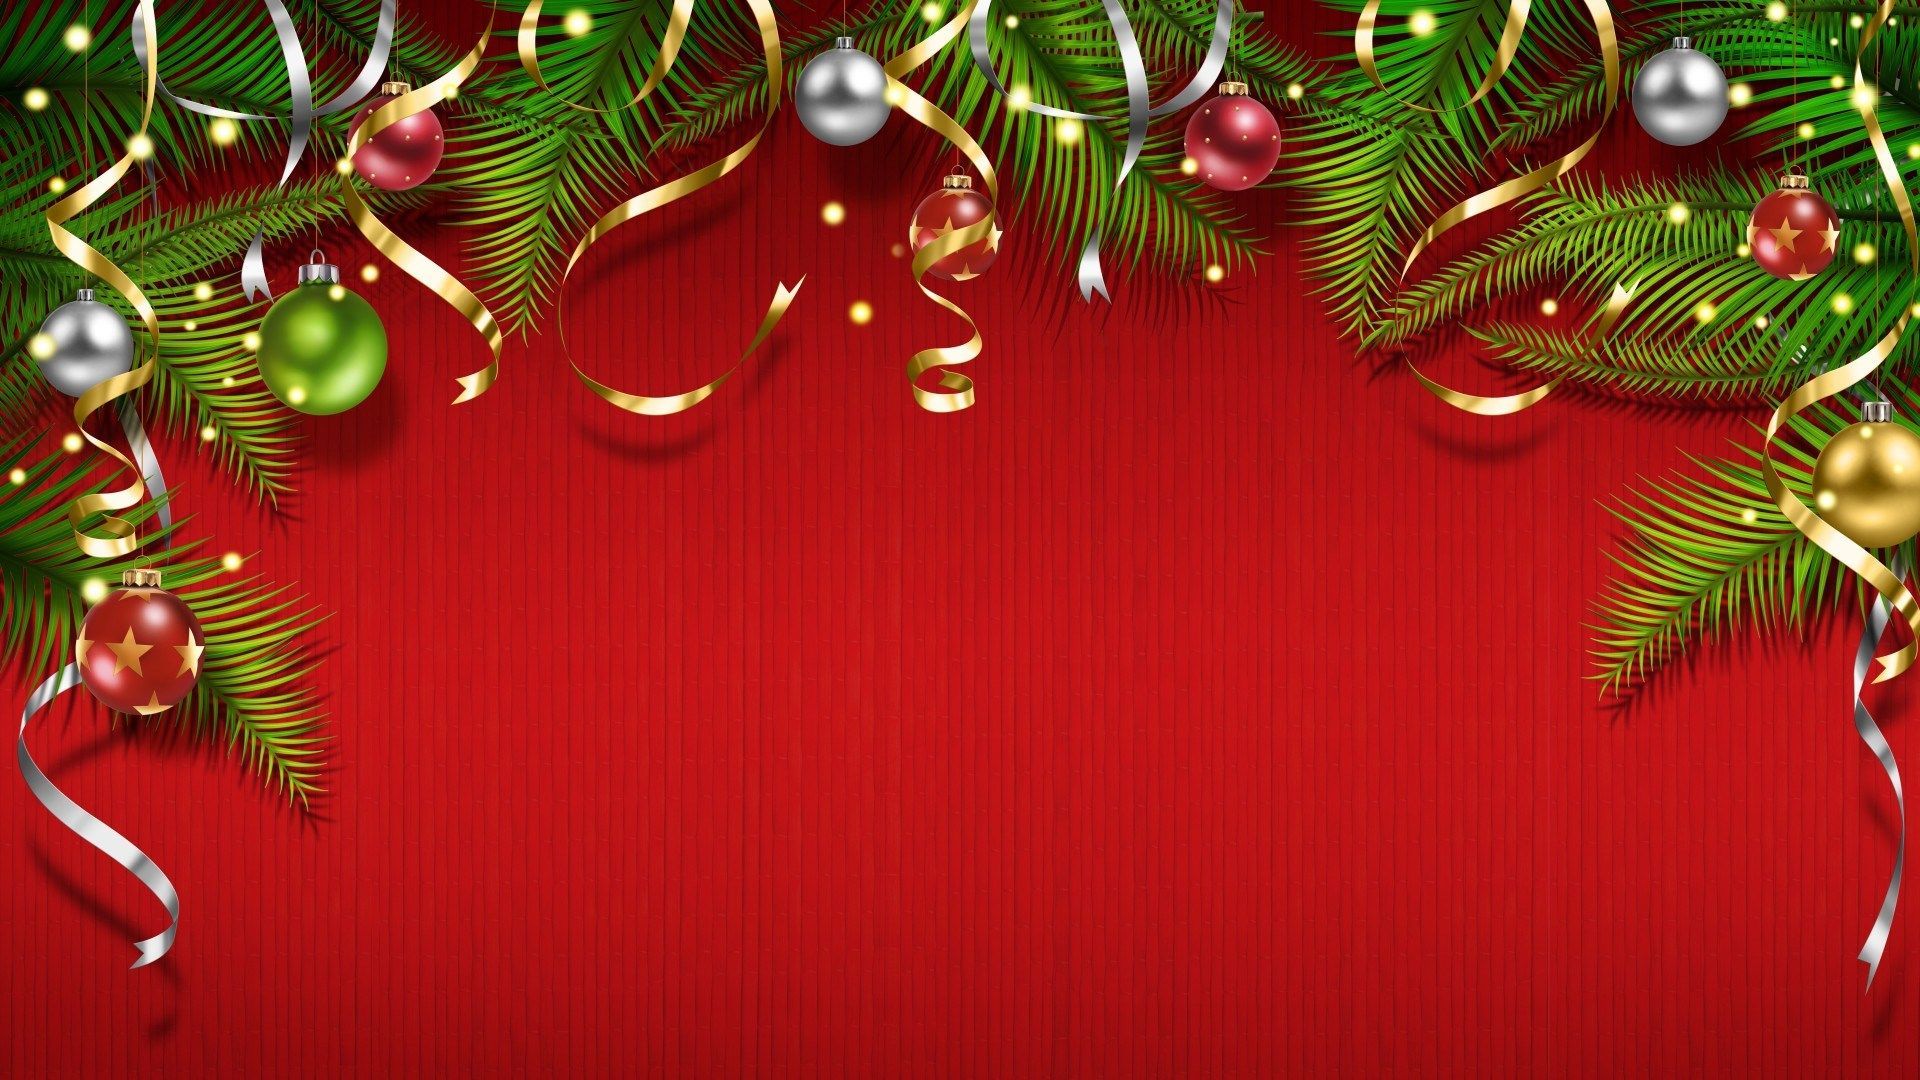 Christmas Party Wallpaper Free Christmas Party Background